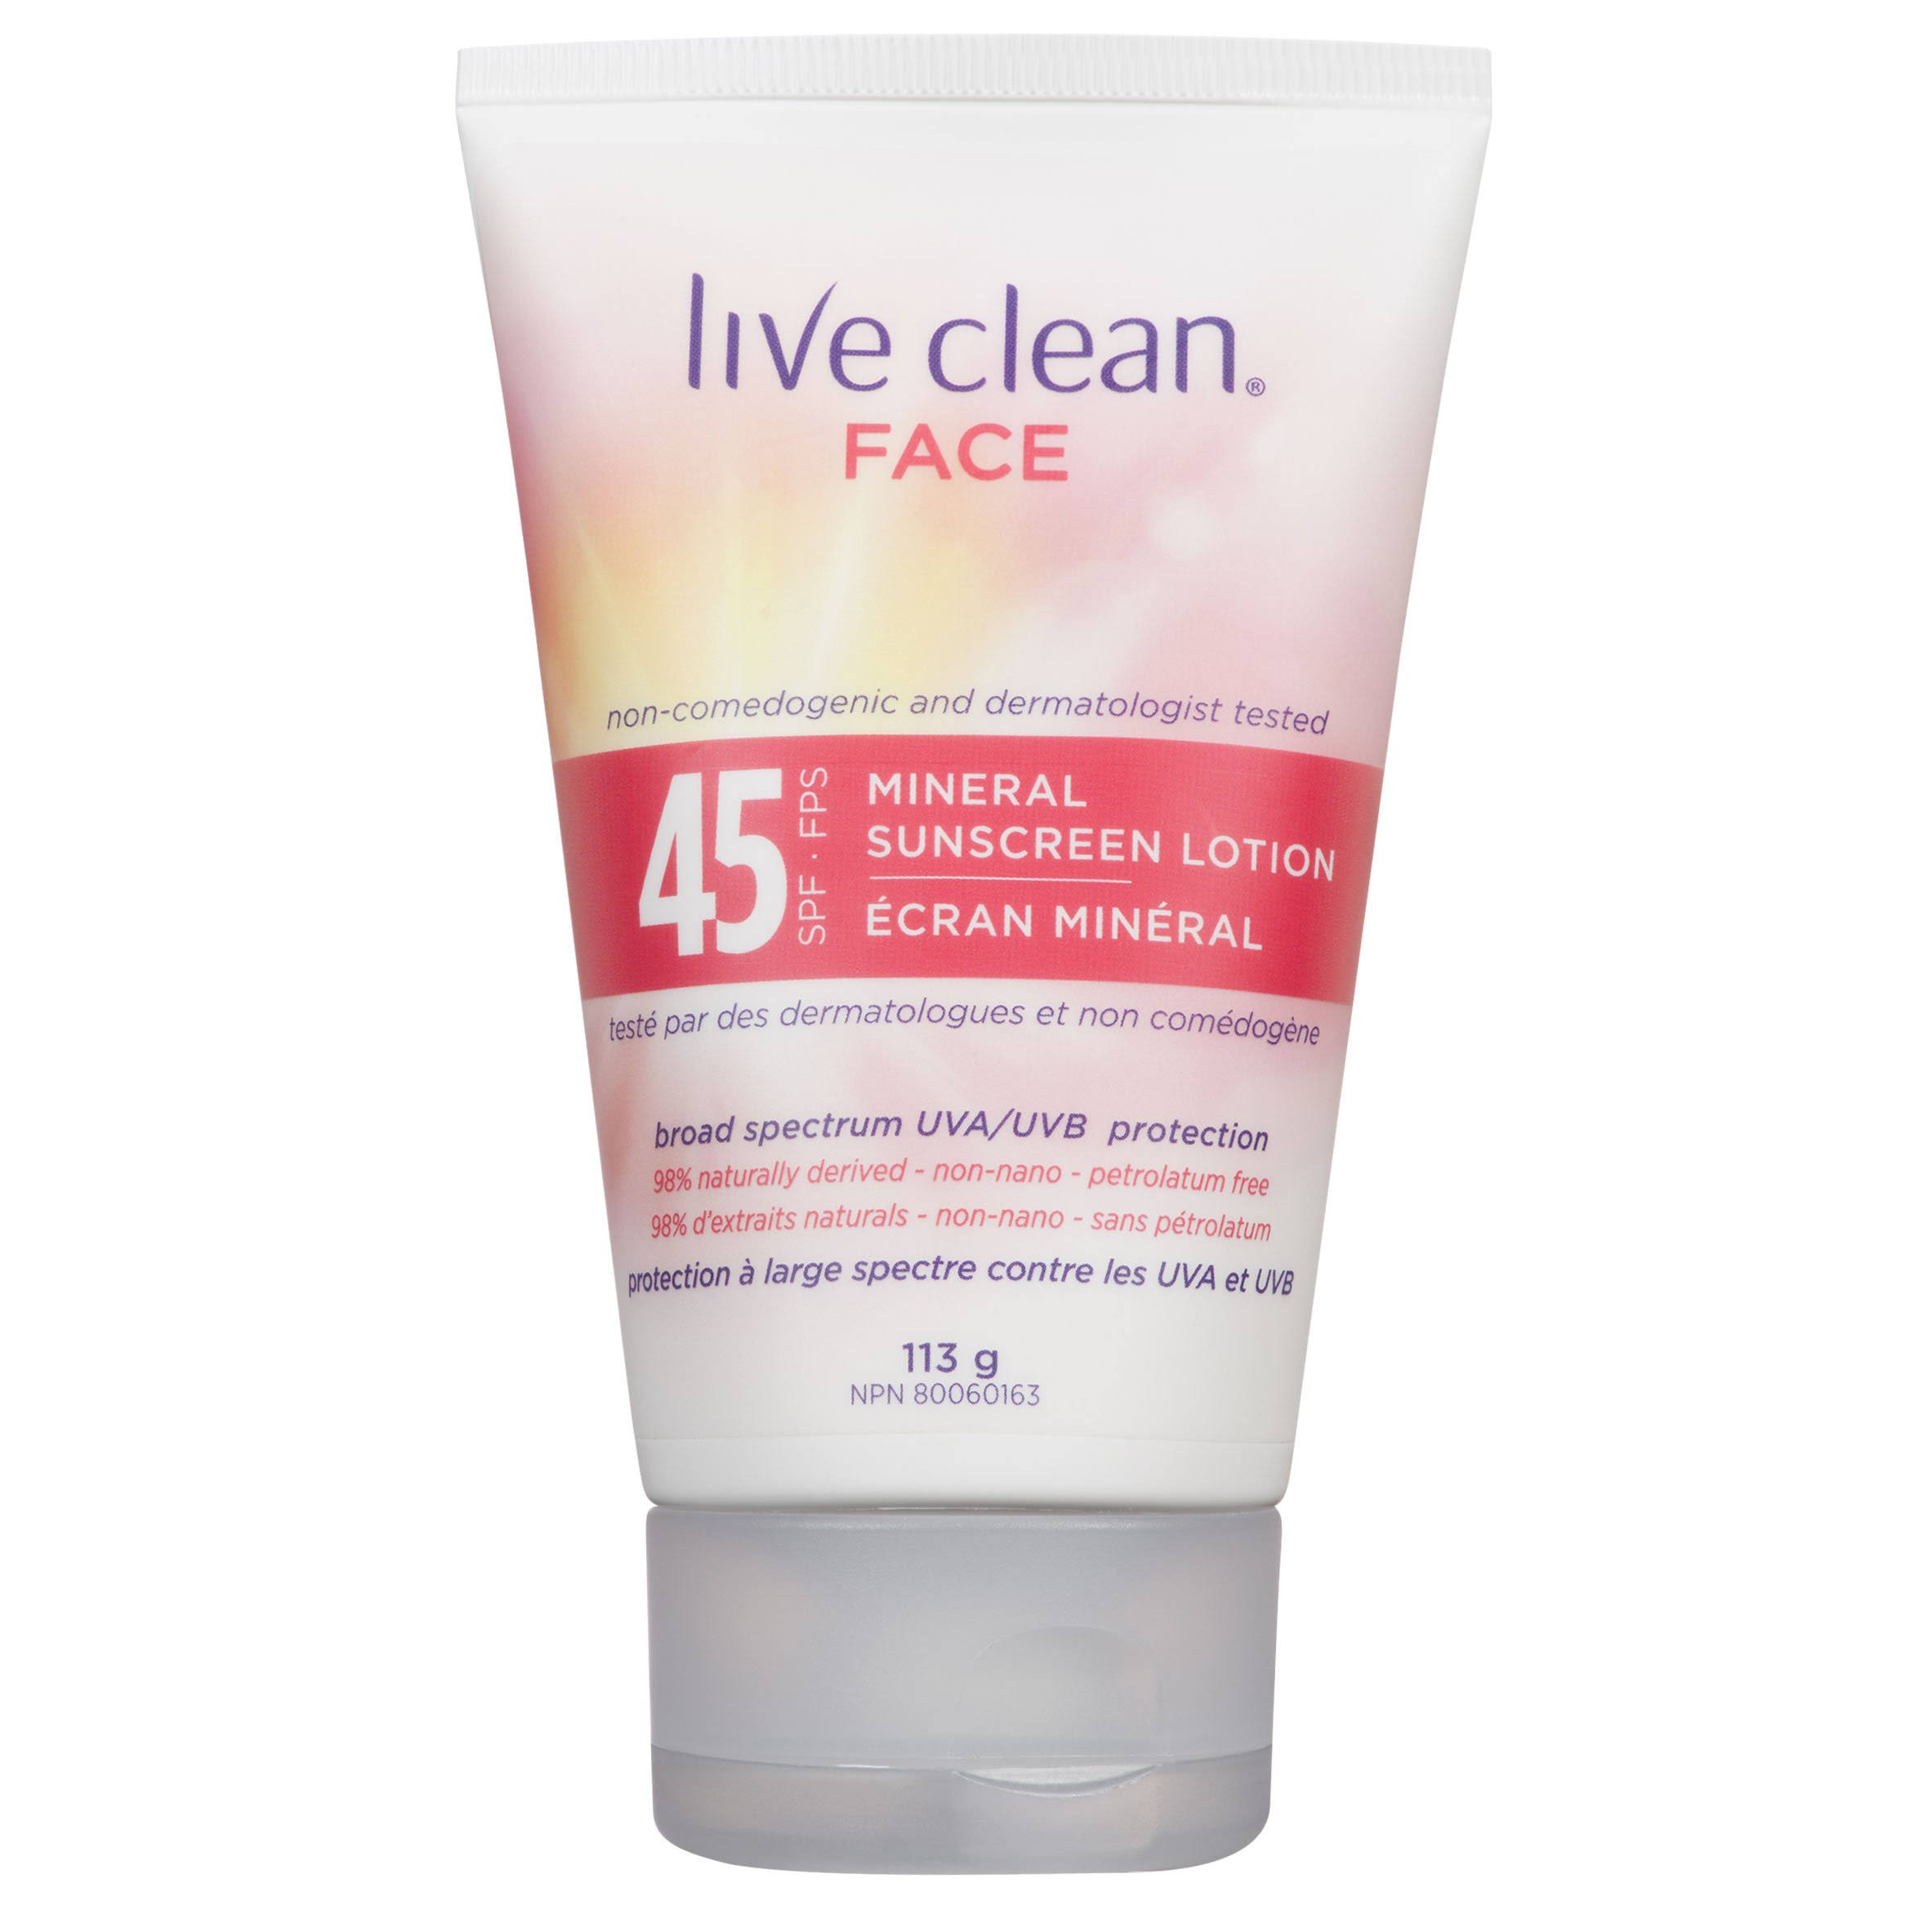 Live Clean - Face Mineral Sunscreen Lotion - 45 SPF | 113g